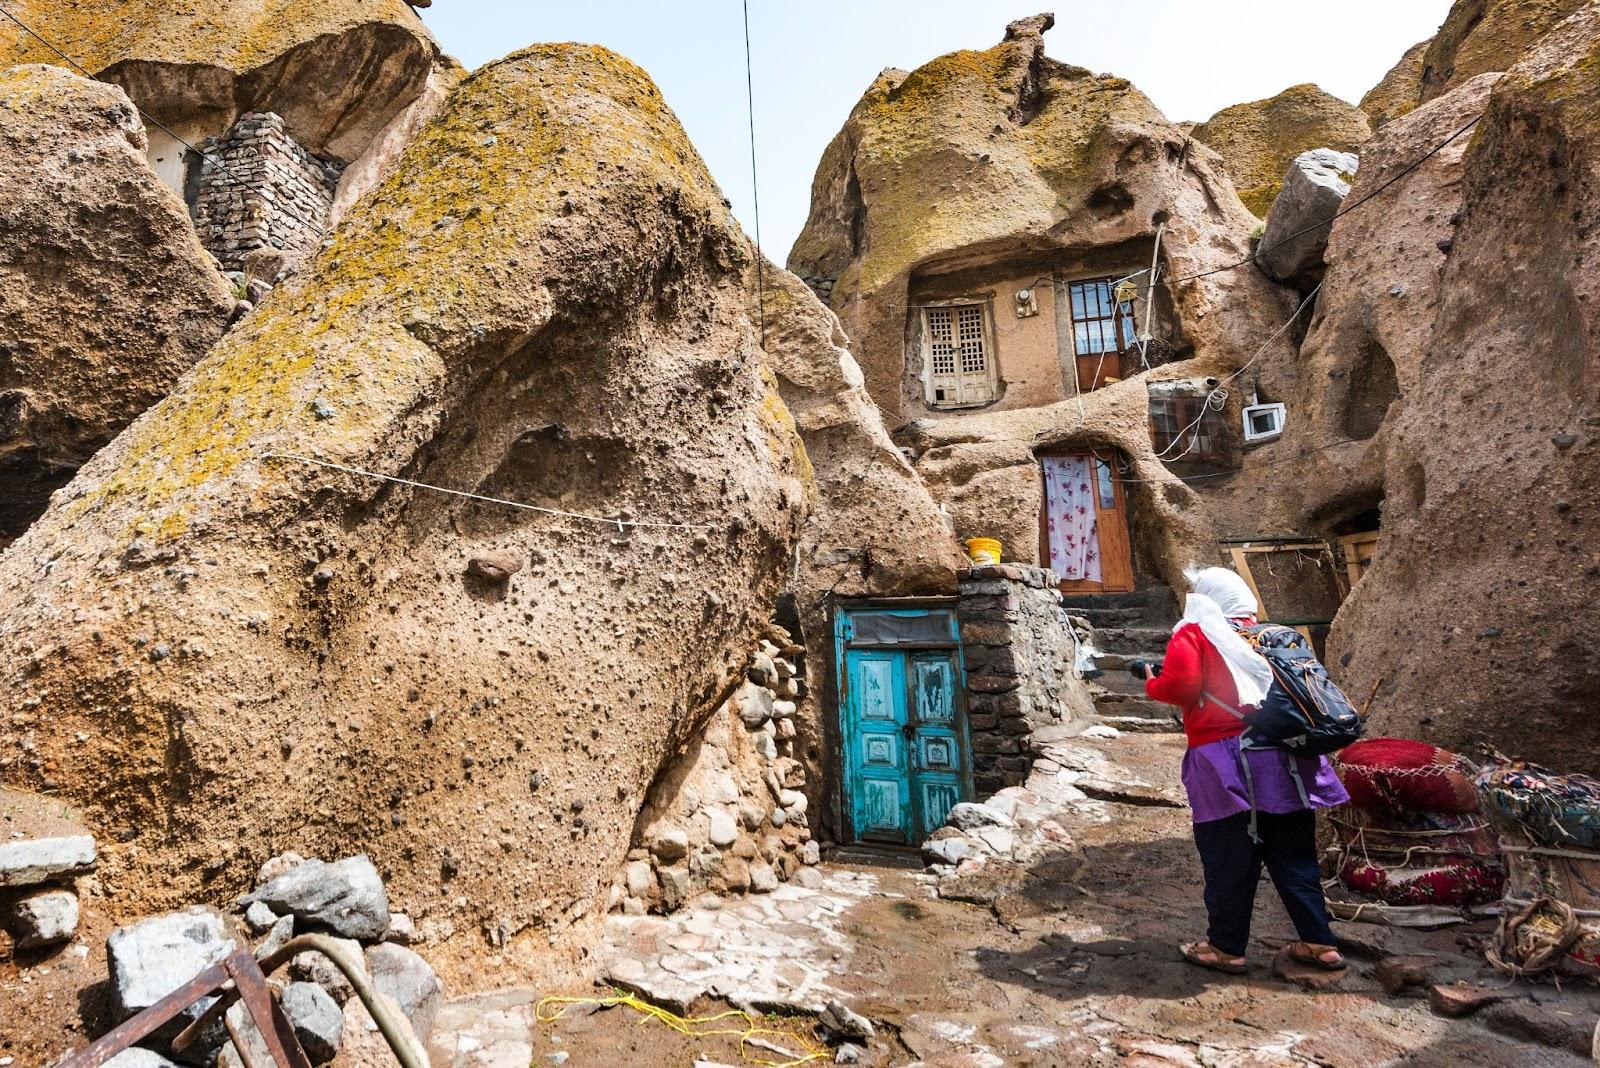 Up close of some of the Kandovan cave homes.